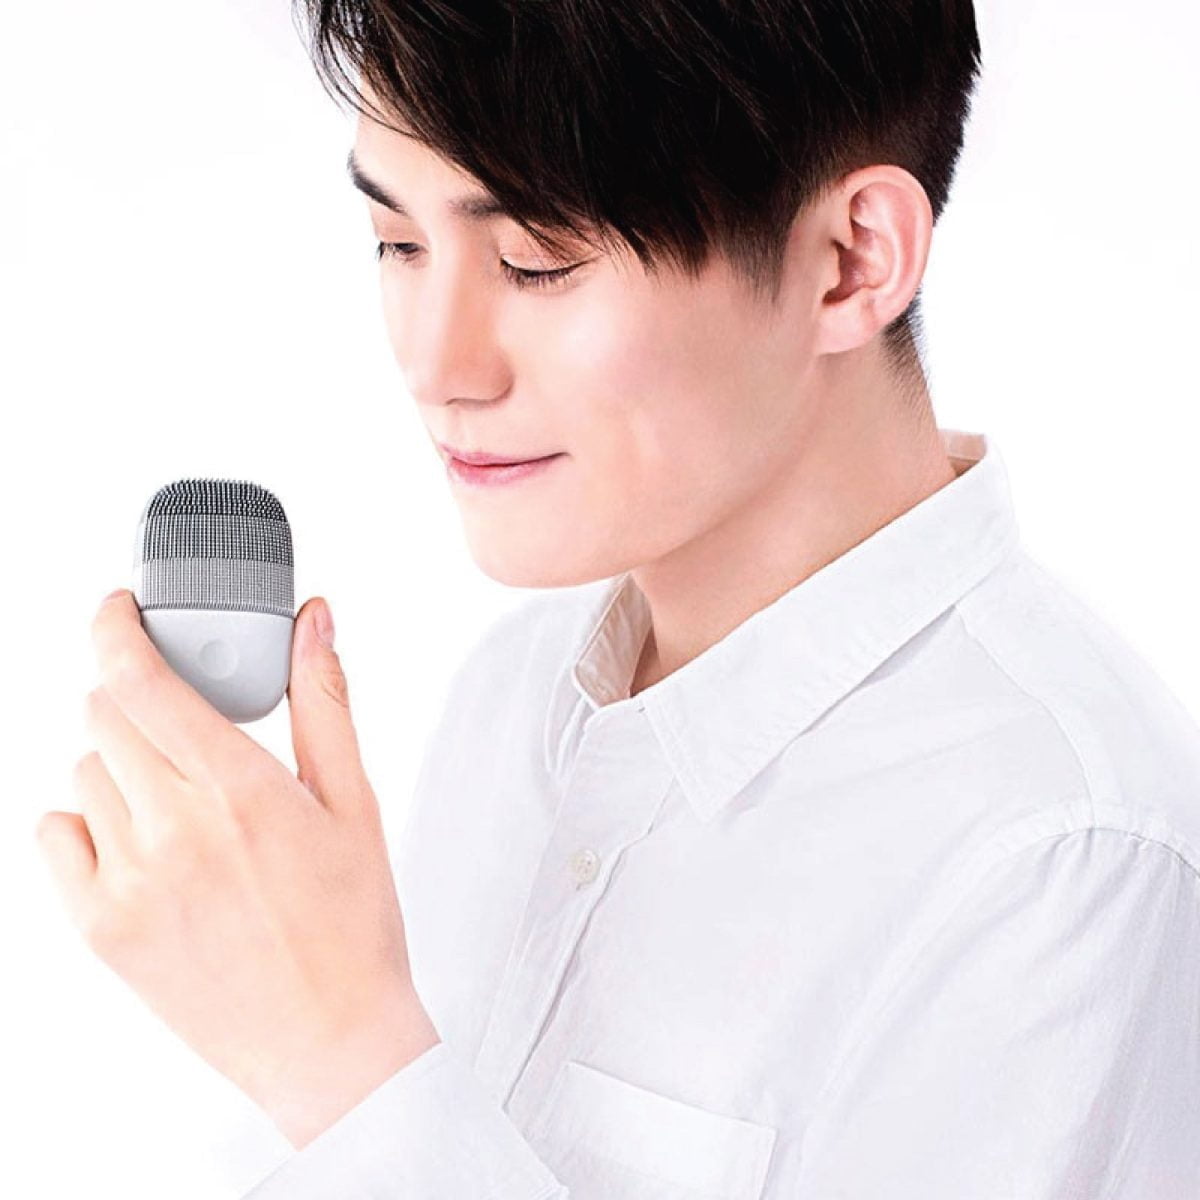 Wtf3 01 Xiaomi &Lt;Strong&Gt;Deep Cleansing Of The Face - 3-Speed Modes - 3 Cleansing Areas - Made Of Hypoallergenic Silicone - Long Battery Life - Default 90S Cleaning&Lt;/Strong&Gt; Xiaomi Mijia Inface Smart Face Cleaner - Pink (2019 Design Award)